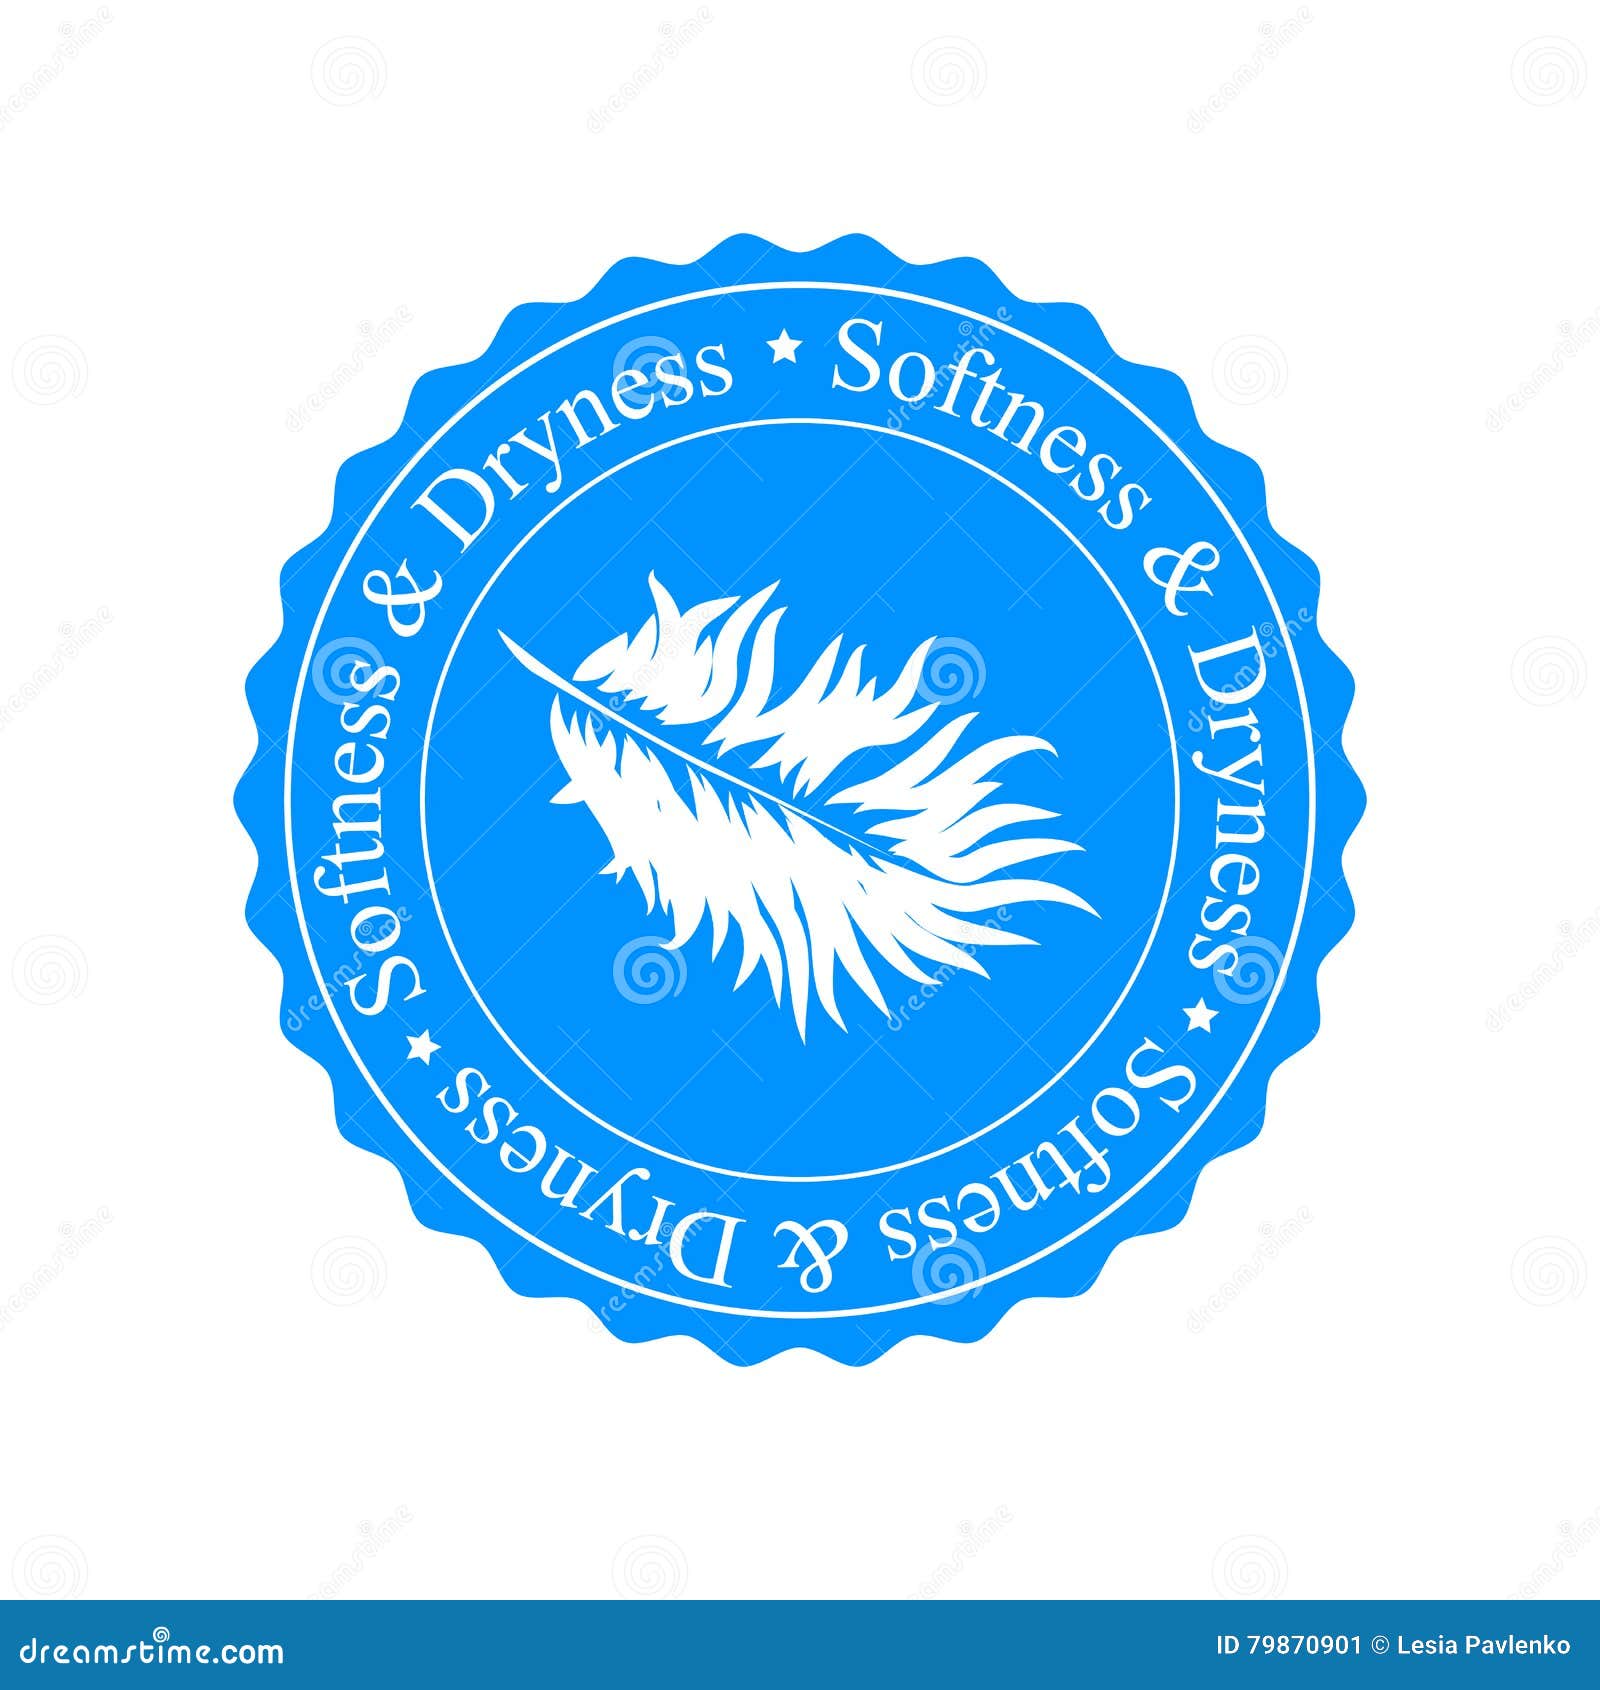 softness and dryness icon. white feather on blue background.